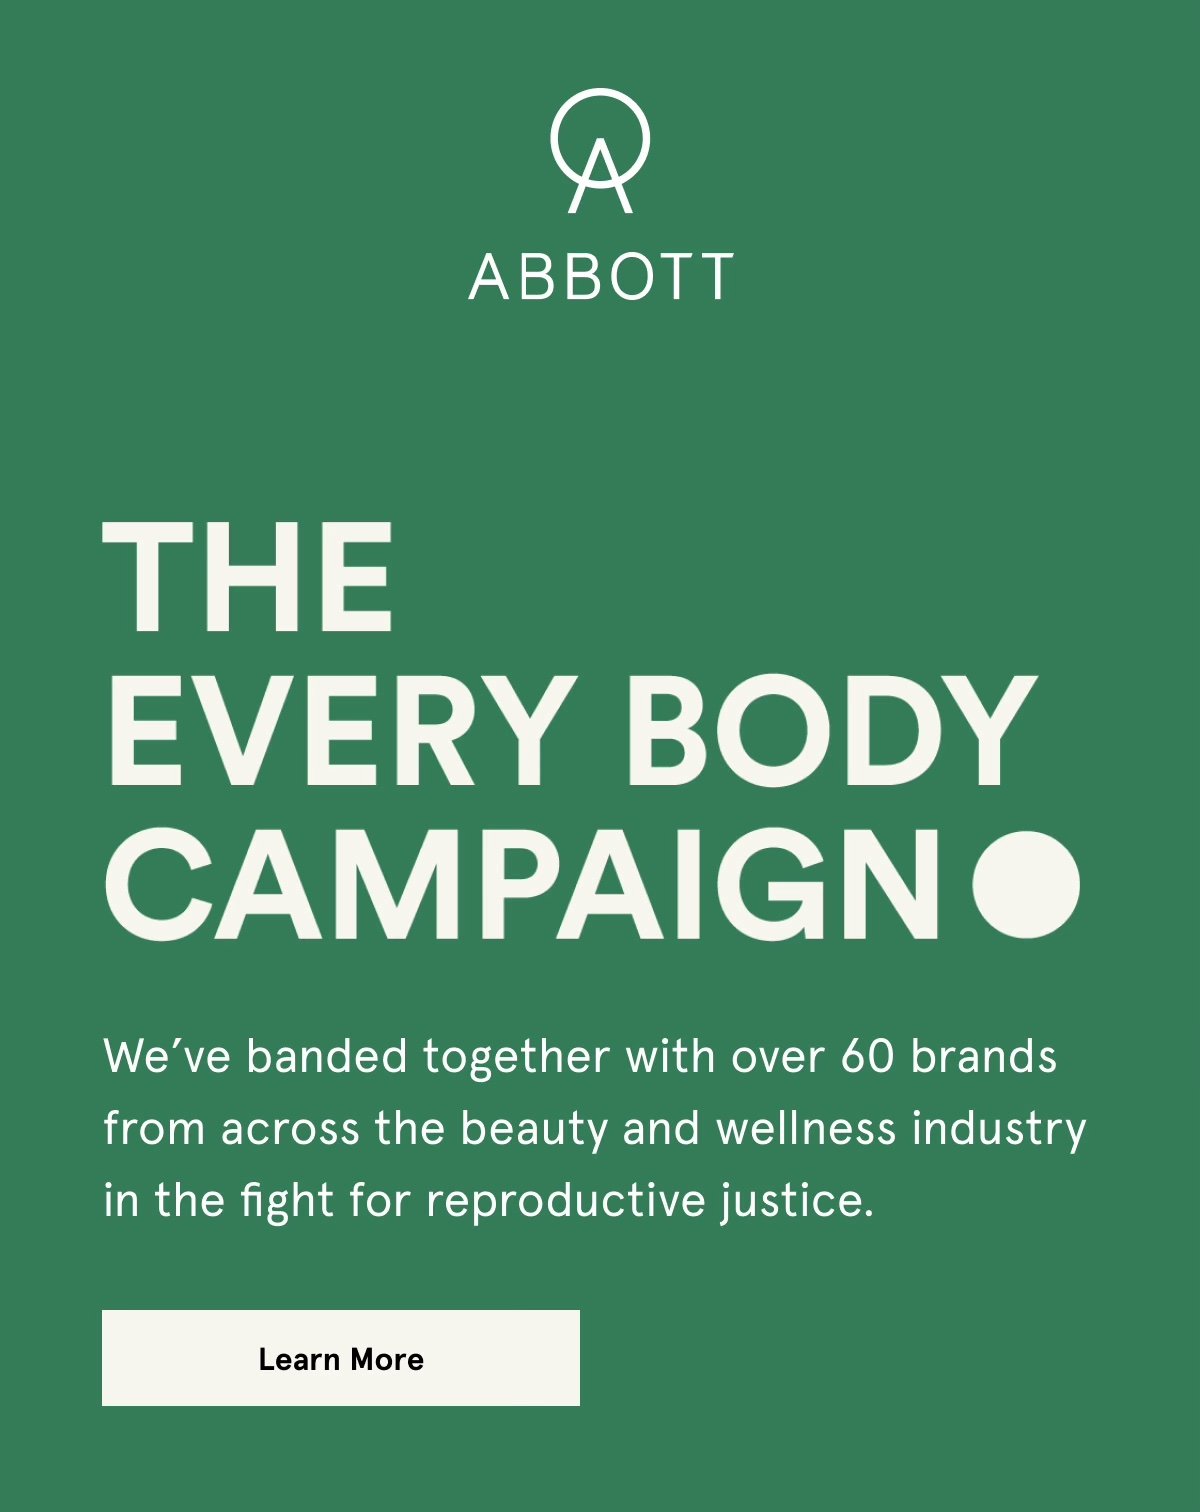 The Every Body Campaign